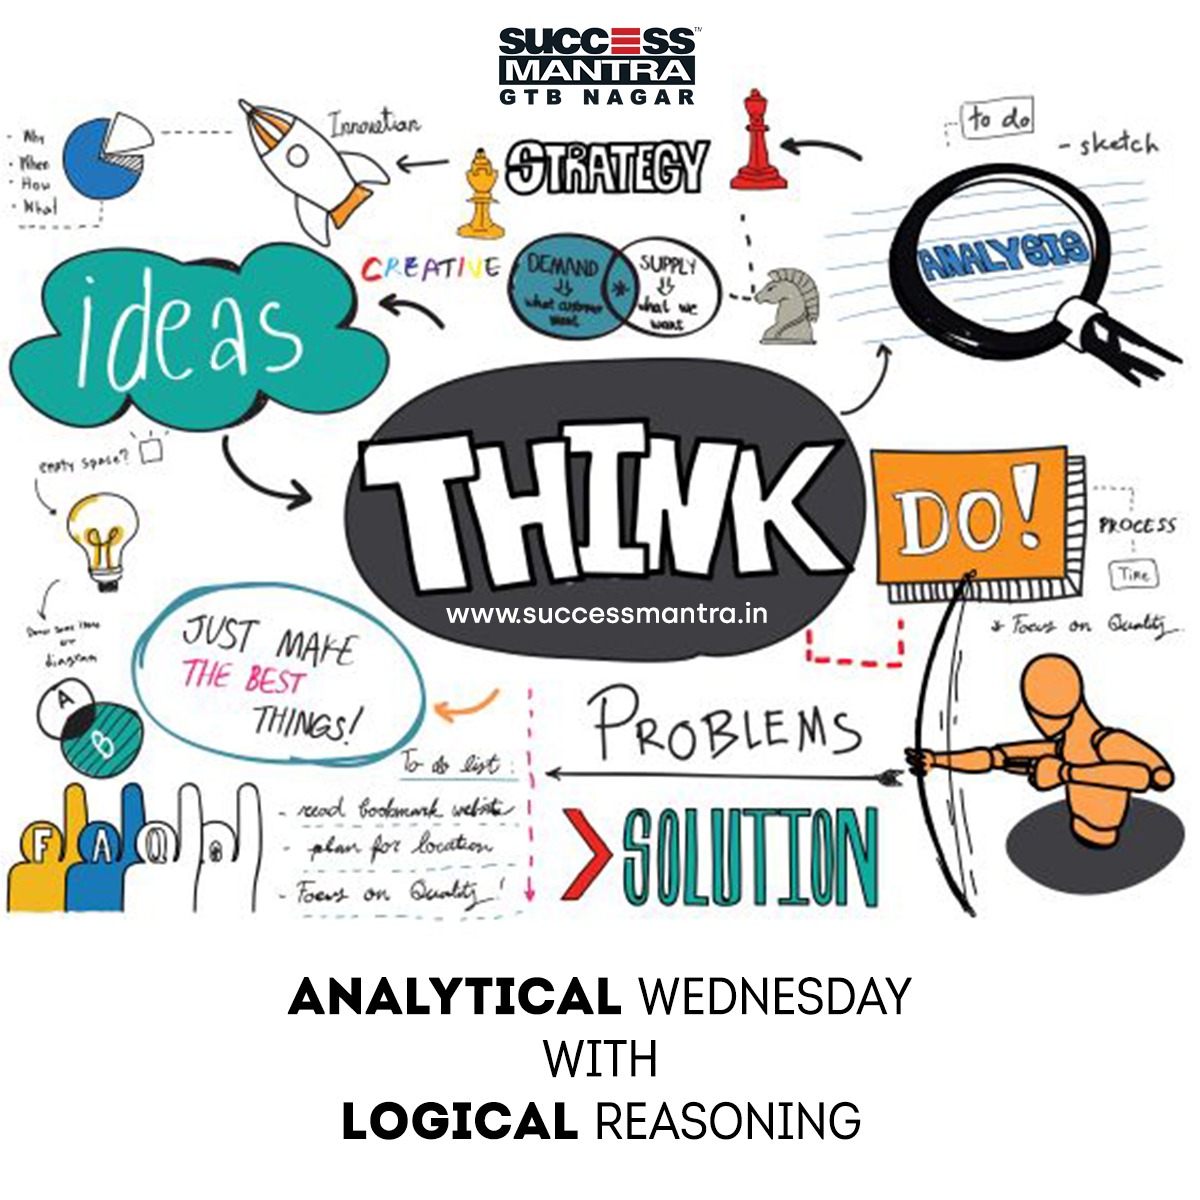 Questions on Logical Reasoning SMLRQ008